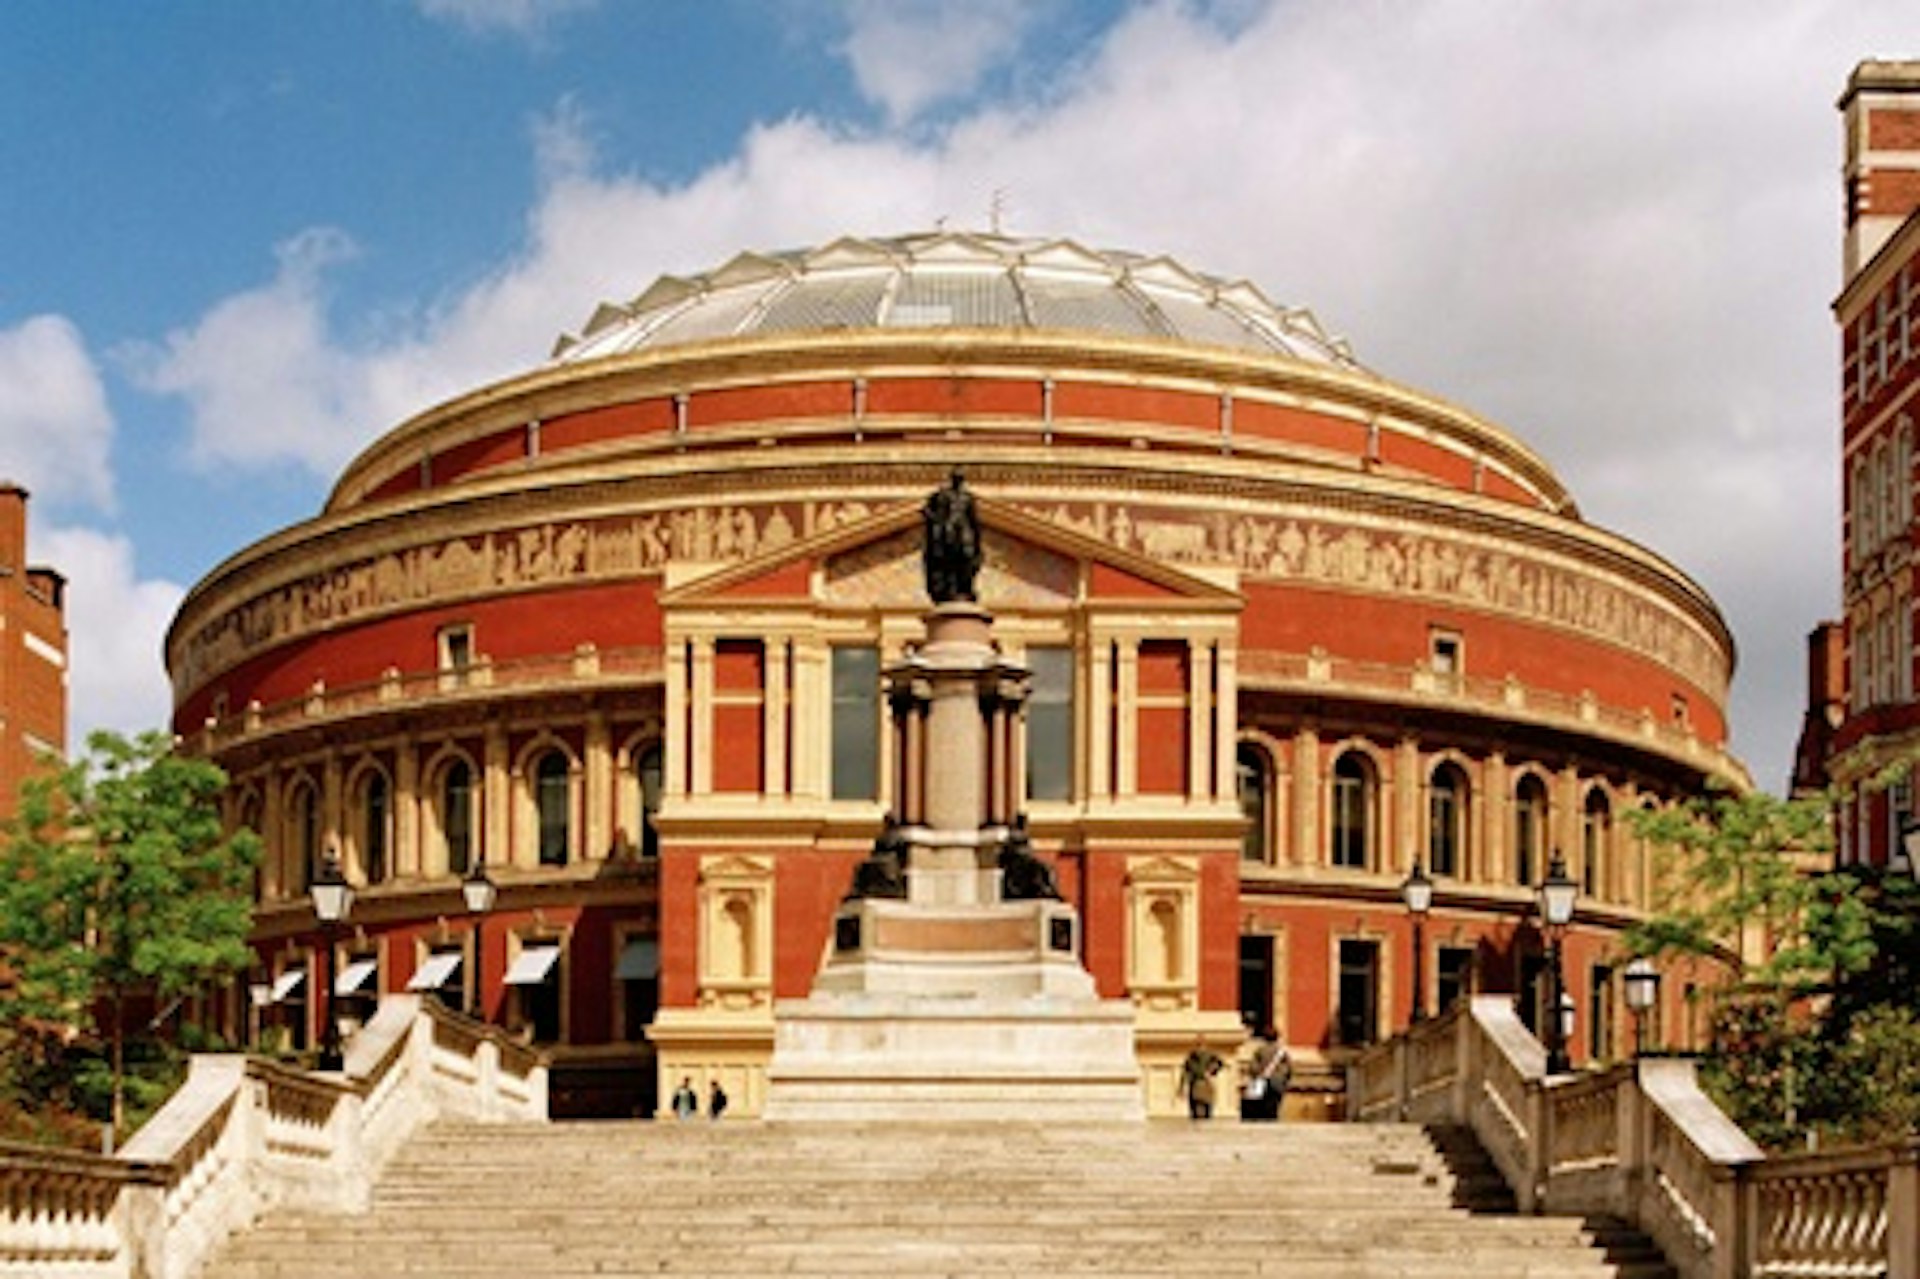 Afternoon Tea for Two at the Royal Albert Hall 4